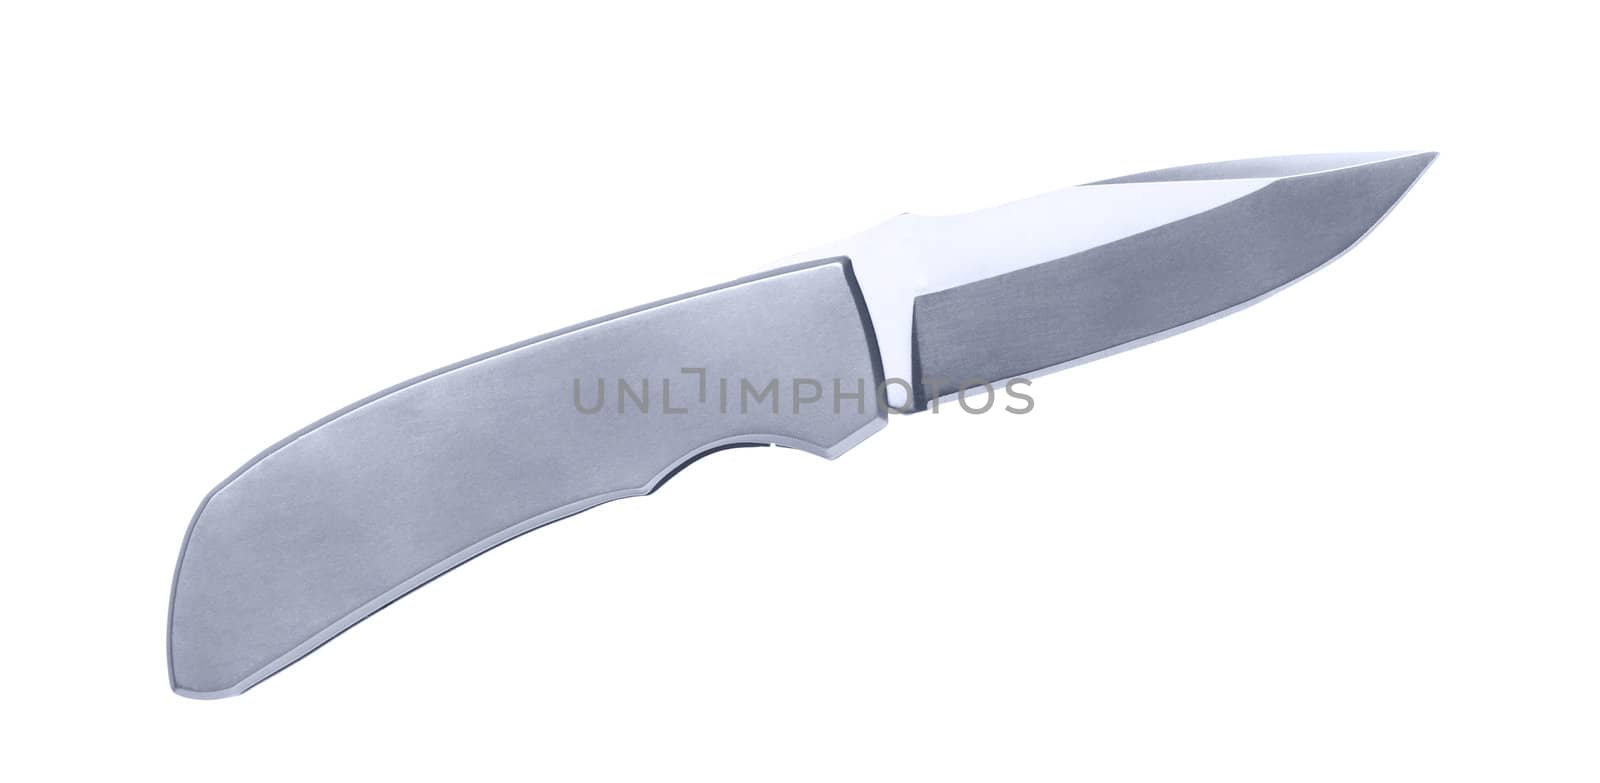 knife on a white background with path included